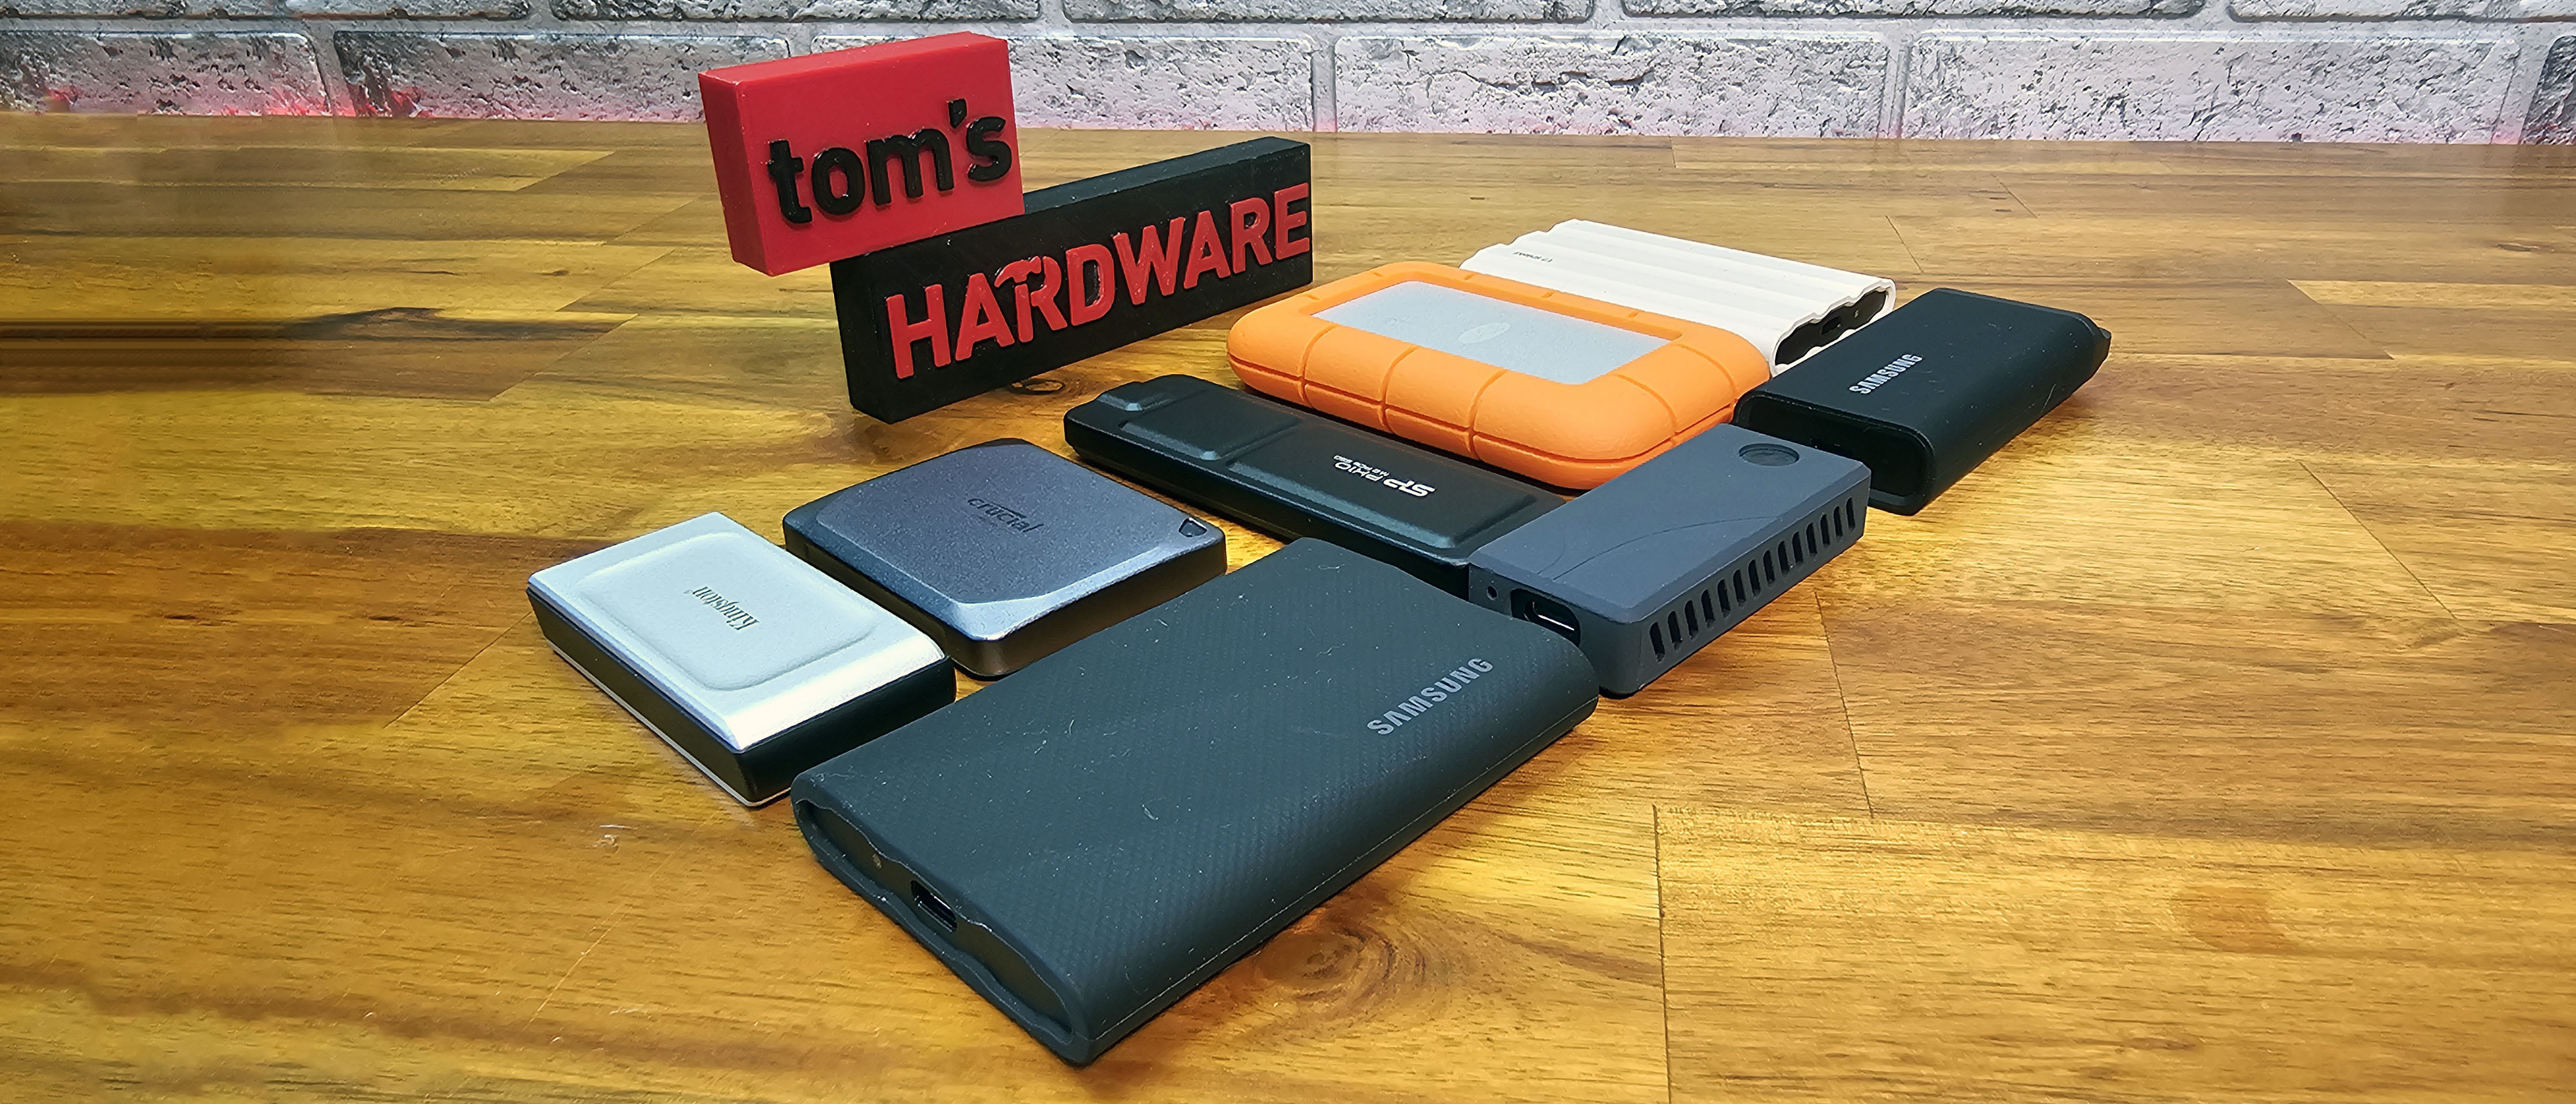 Samsung T7 Shield Portable SSD Review: Tough and Consistent Portable  Storage (Updated)